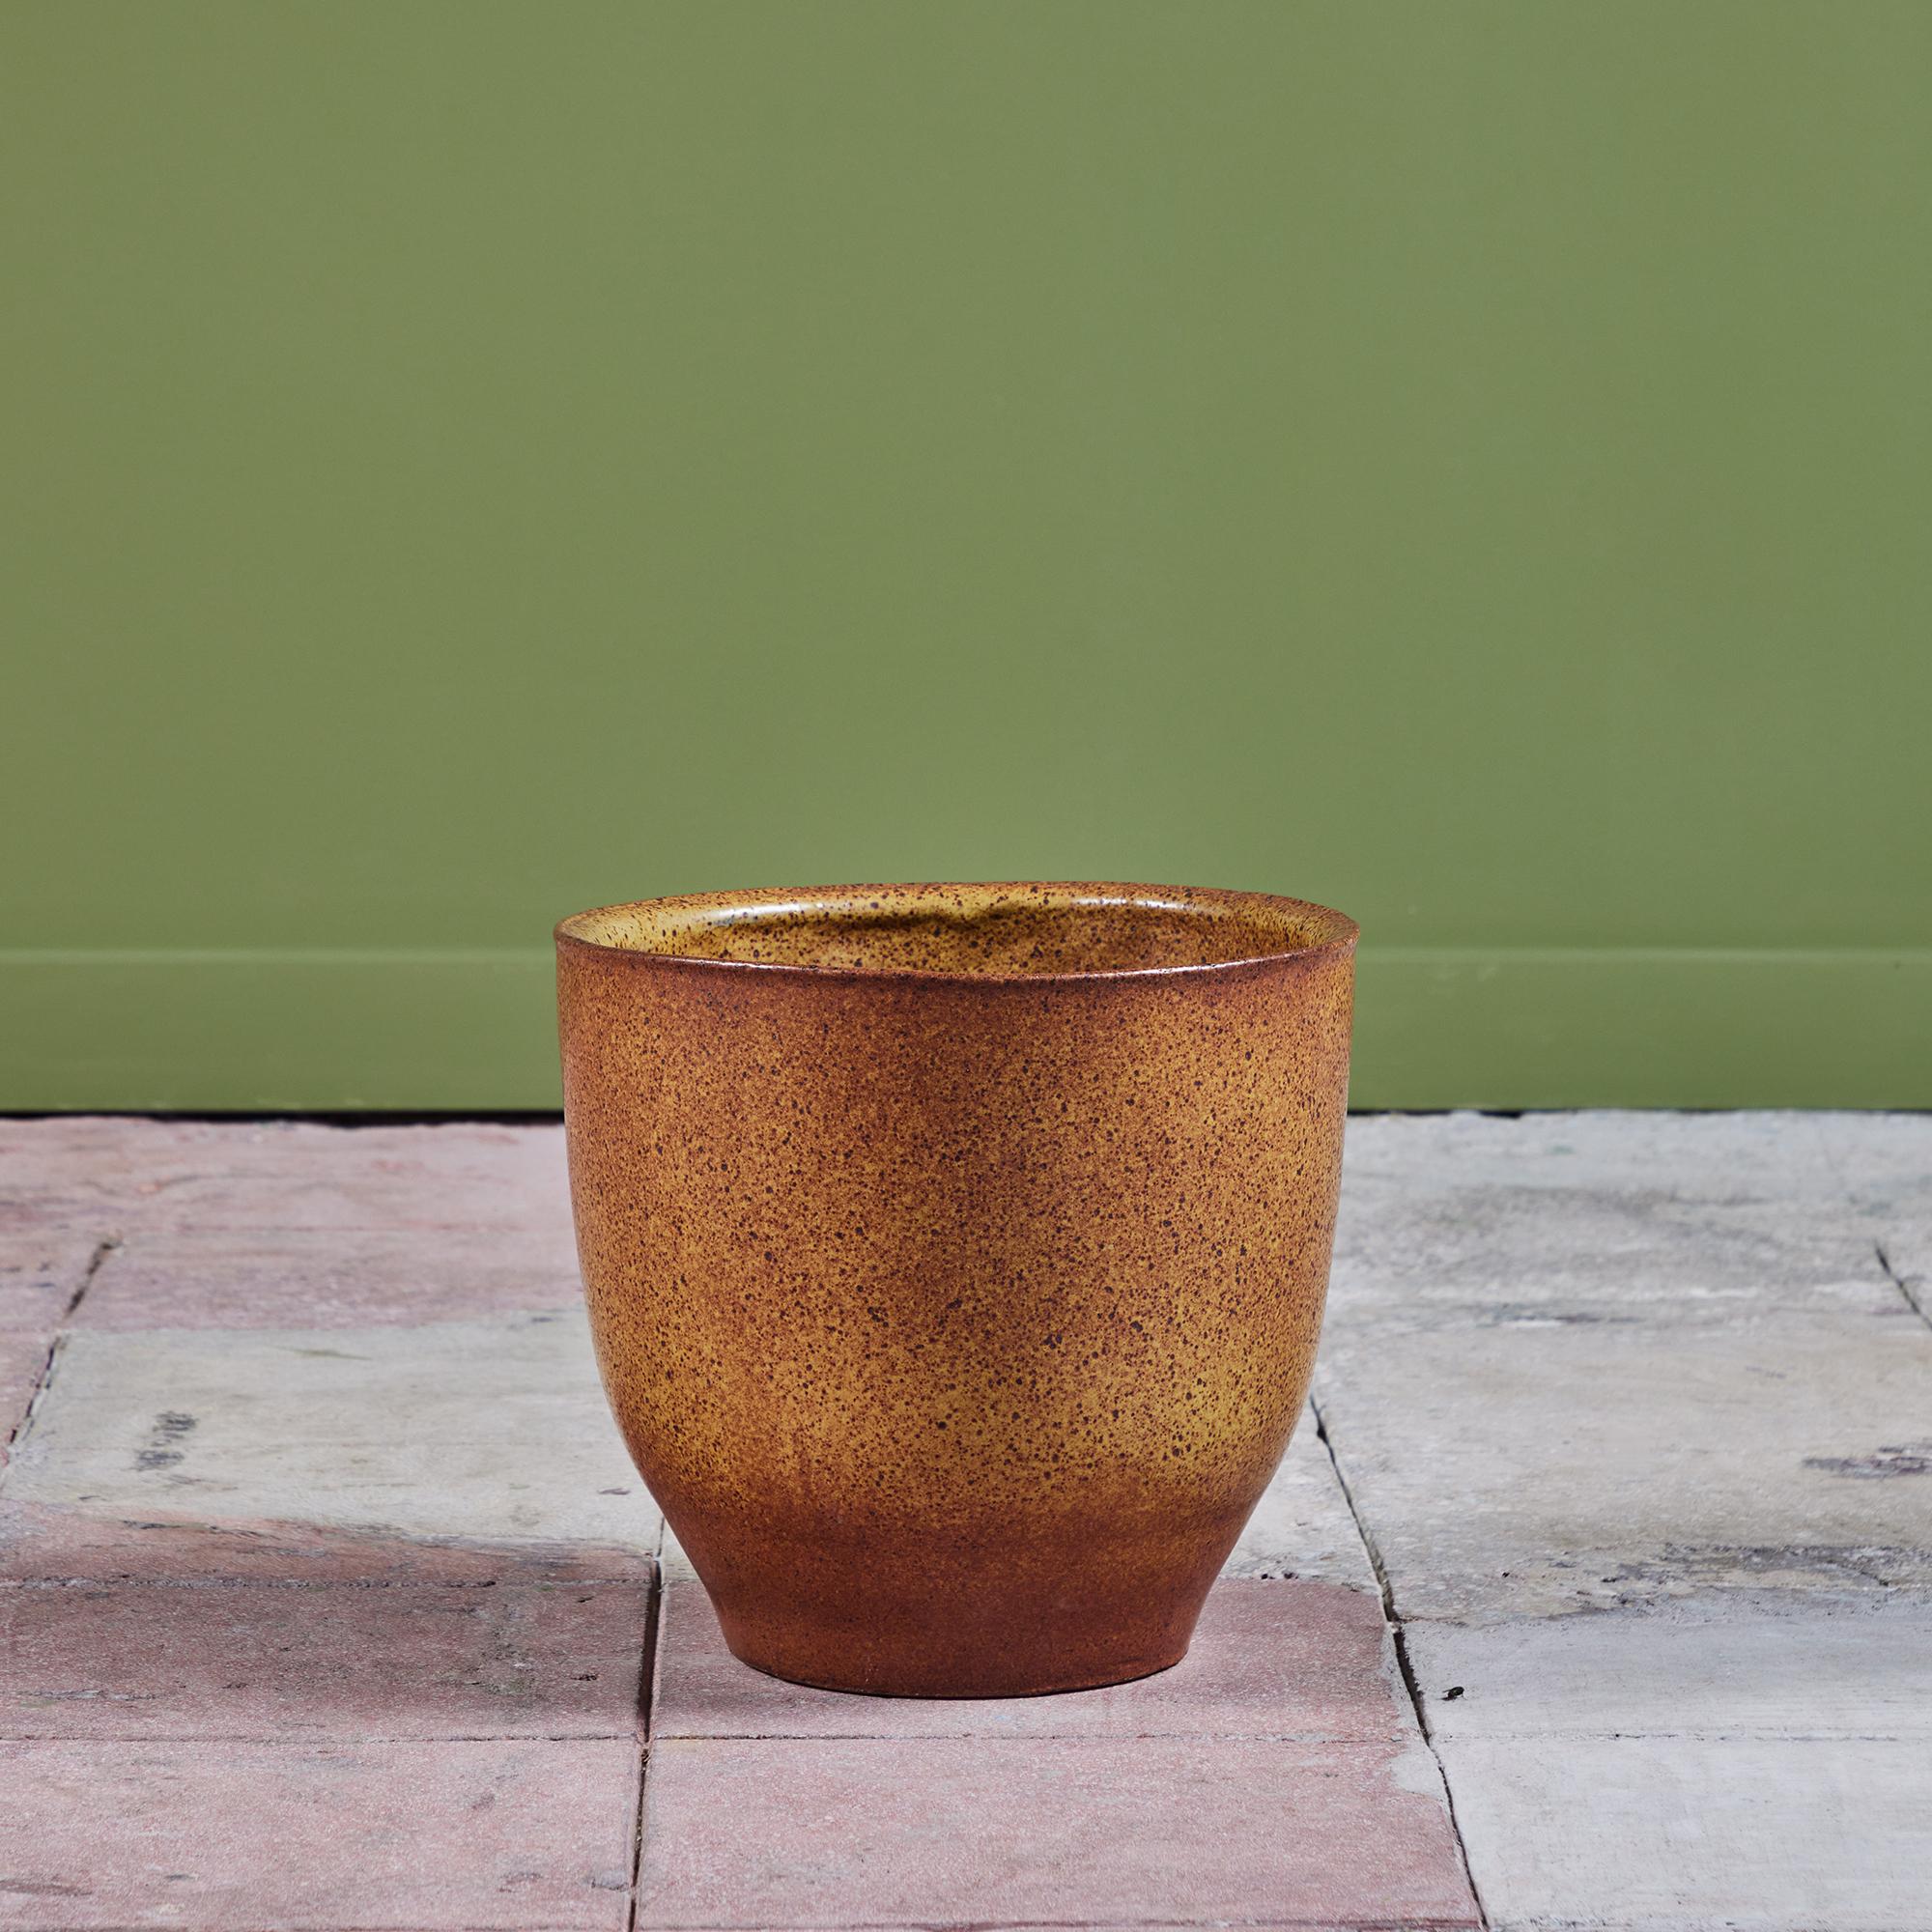 David Cressey Pro/Artisan collection Planter for Architectural Pottery. This stoneware planter has a sienna yellow glazed interior and exterior. The top of the planter has slightly bowed sides and a flattened lip while the bottom tappers inwards.